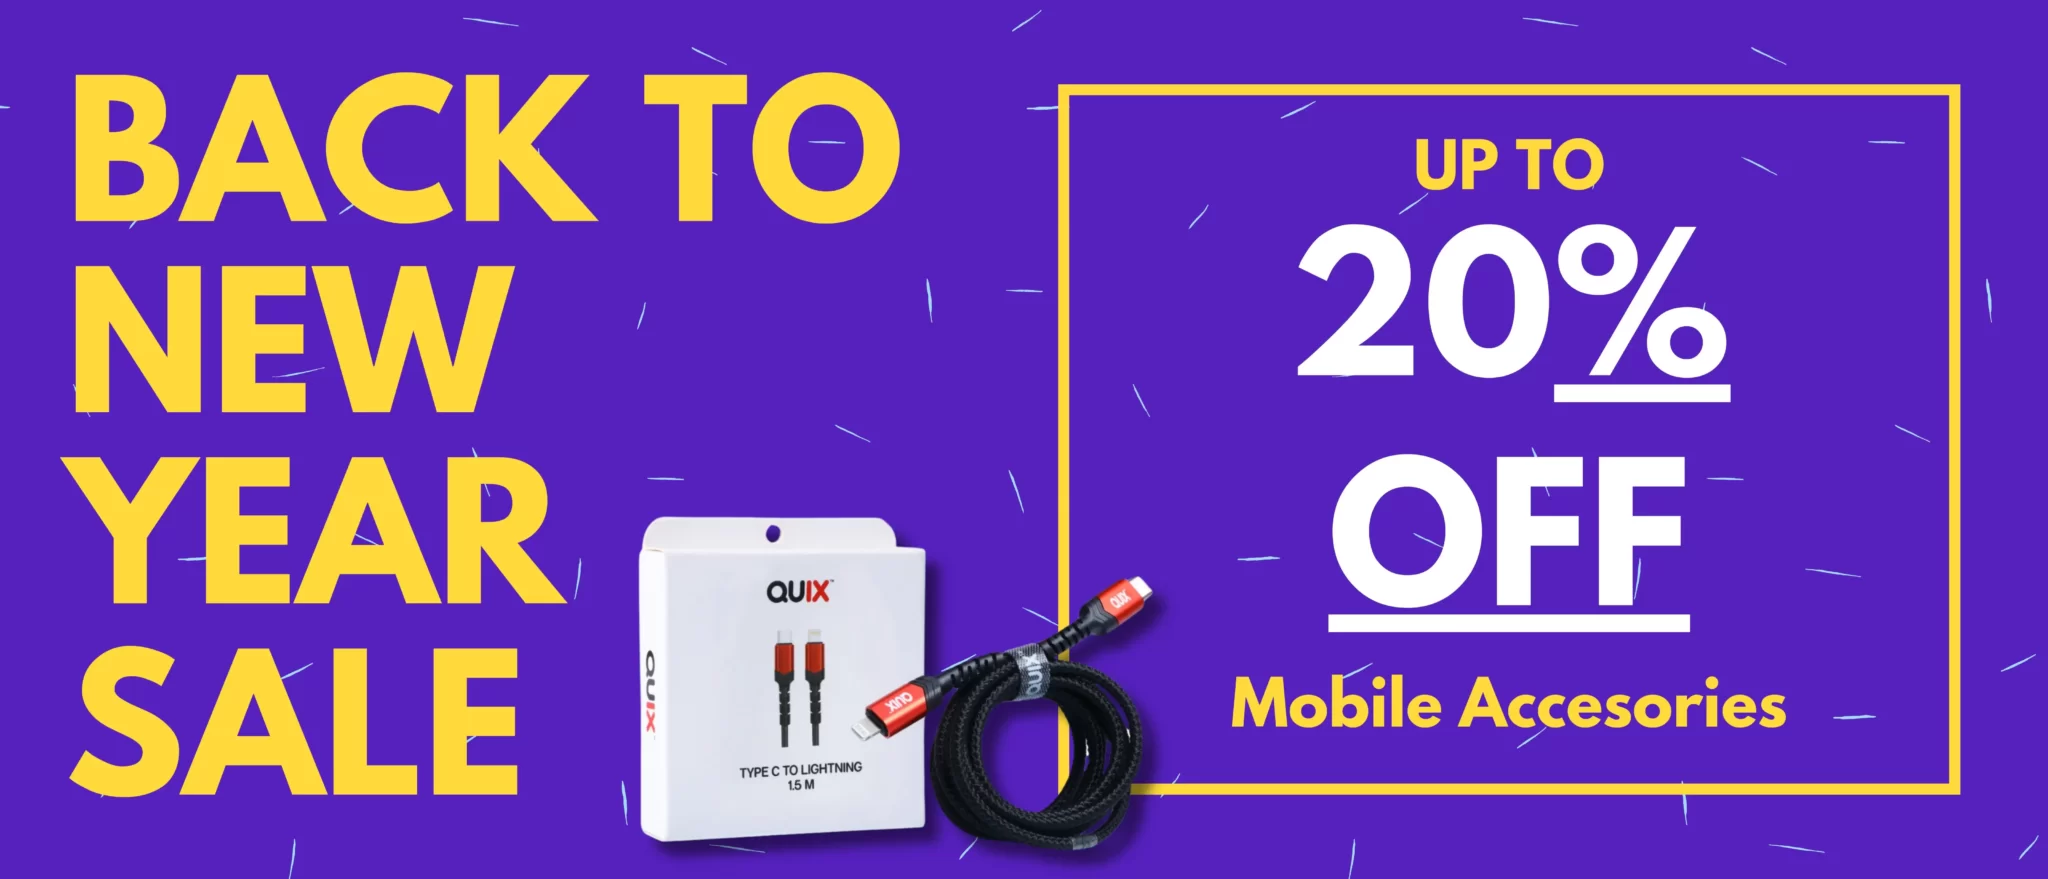 Up to 20% off Mobile Accesories